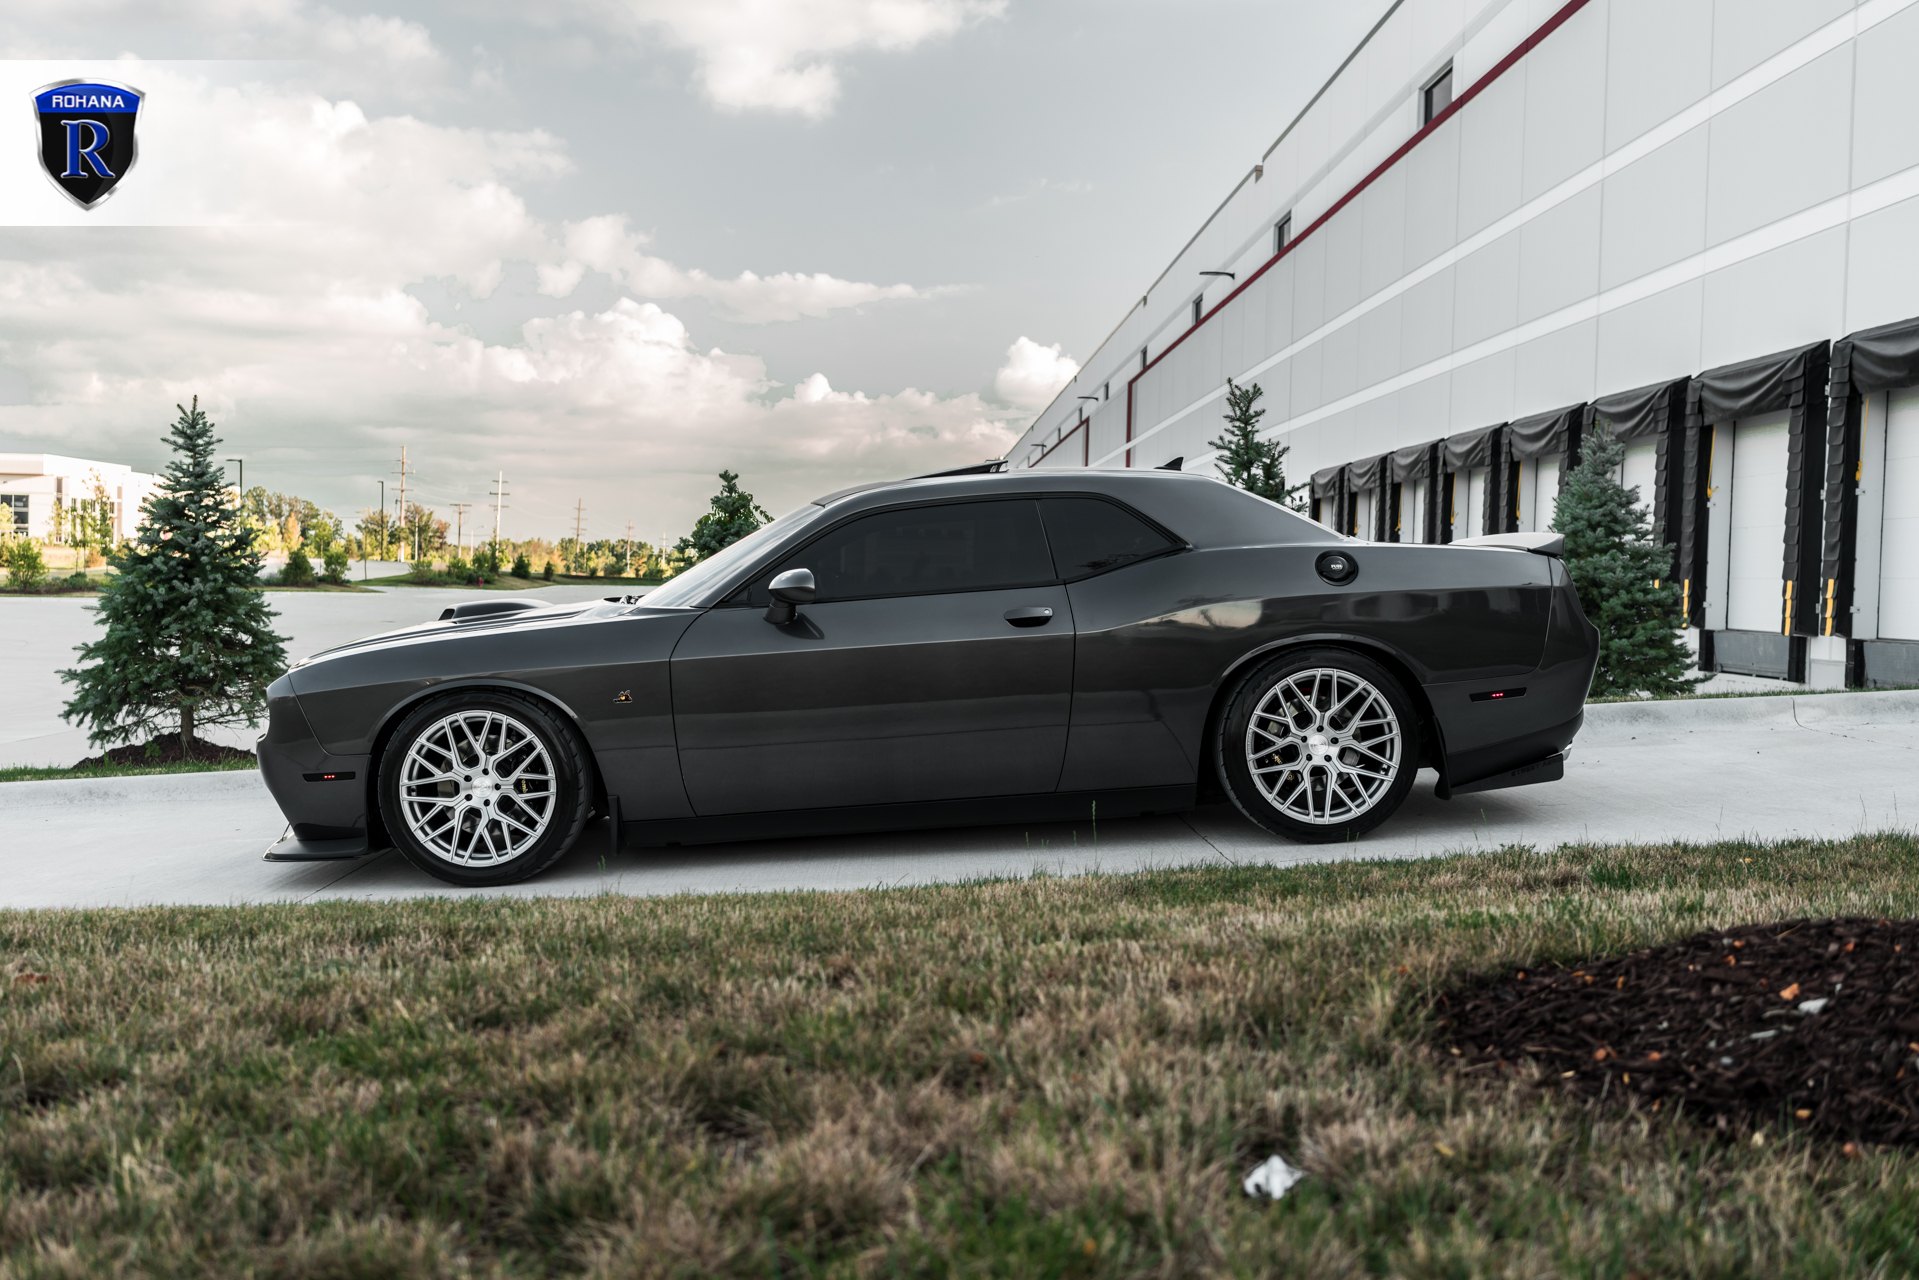 Aftermarket Side Skirts on Gray Dodge Challenger - Photo by Rohana Wheels